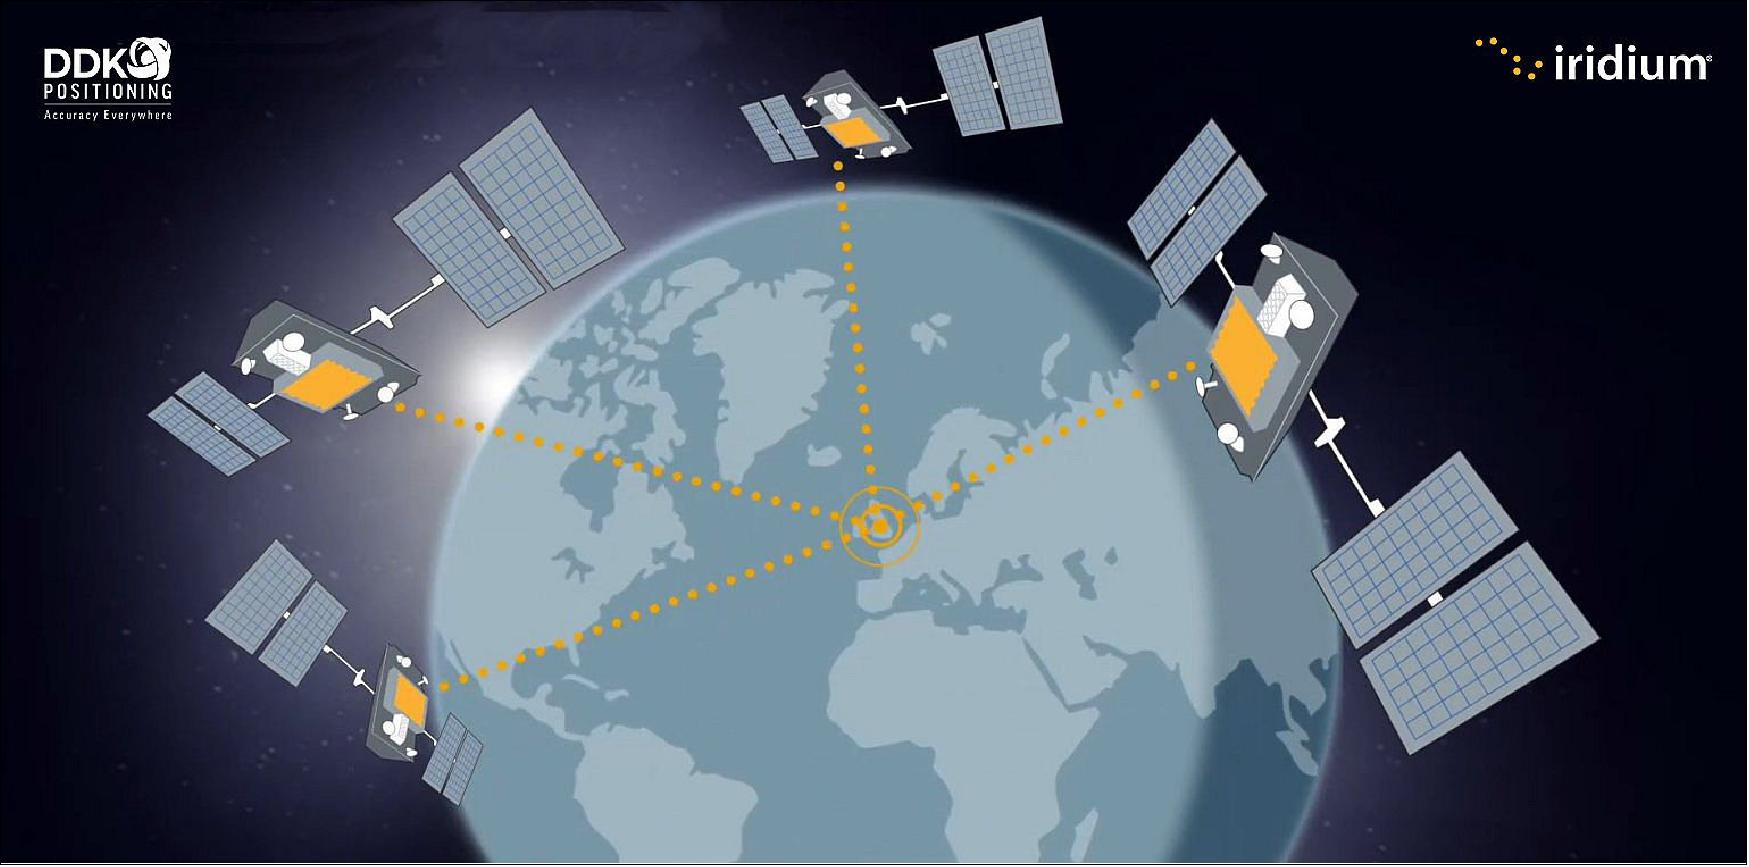 Figure 9: Through the Iridium satellite network, DDK Positioning delivers high precision GPS accuracy of within 5 cm, while standard GPS accuracy is within 10 meters (image credit: DDK Positioning, Iridium)